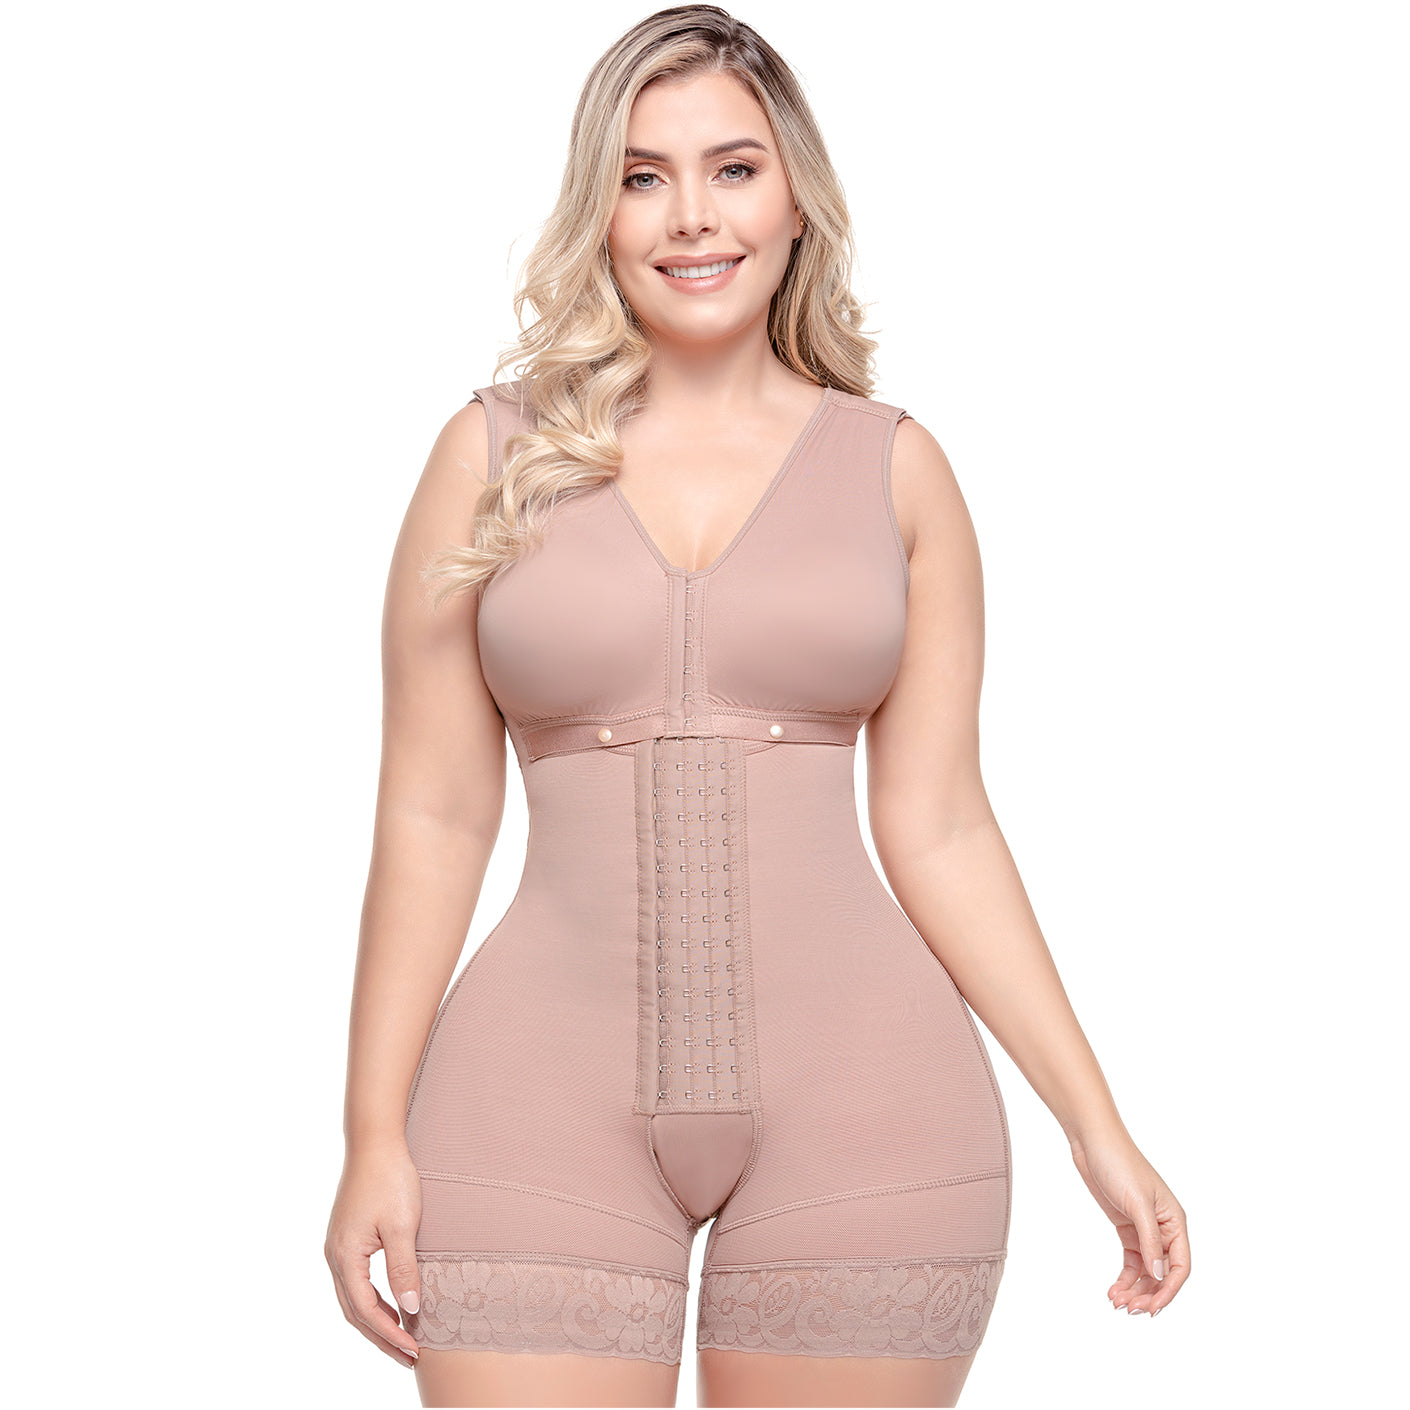 Sculpt your body in this shapewear